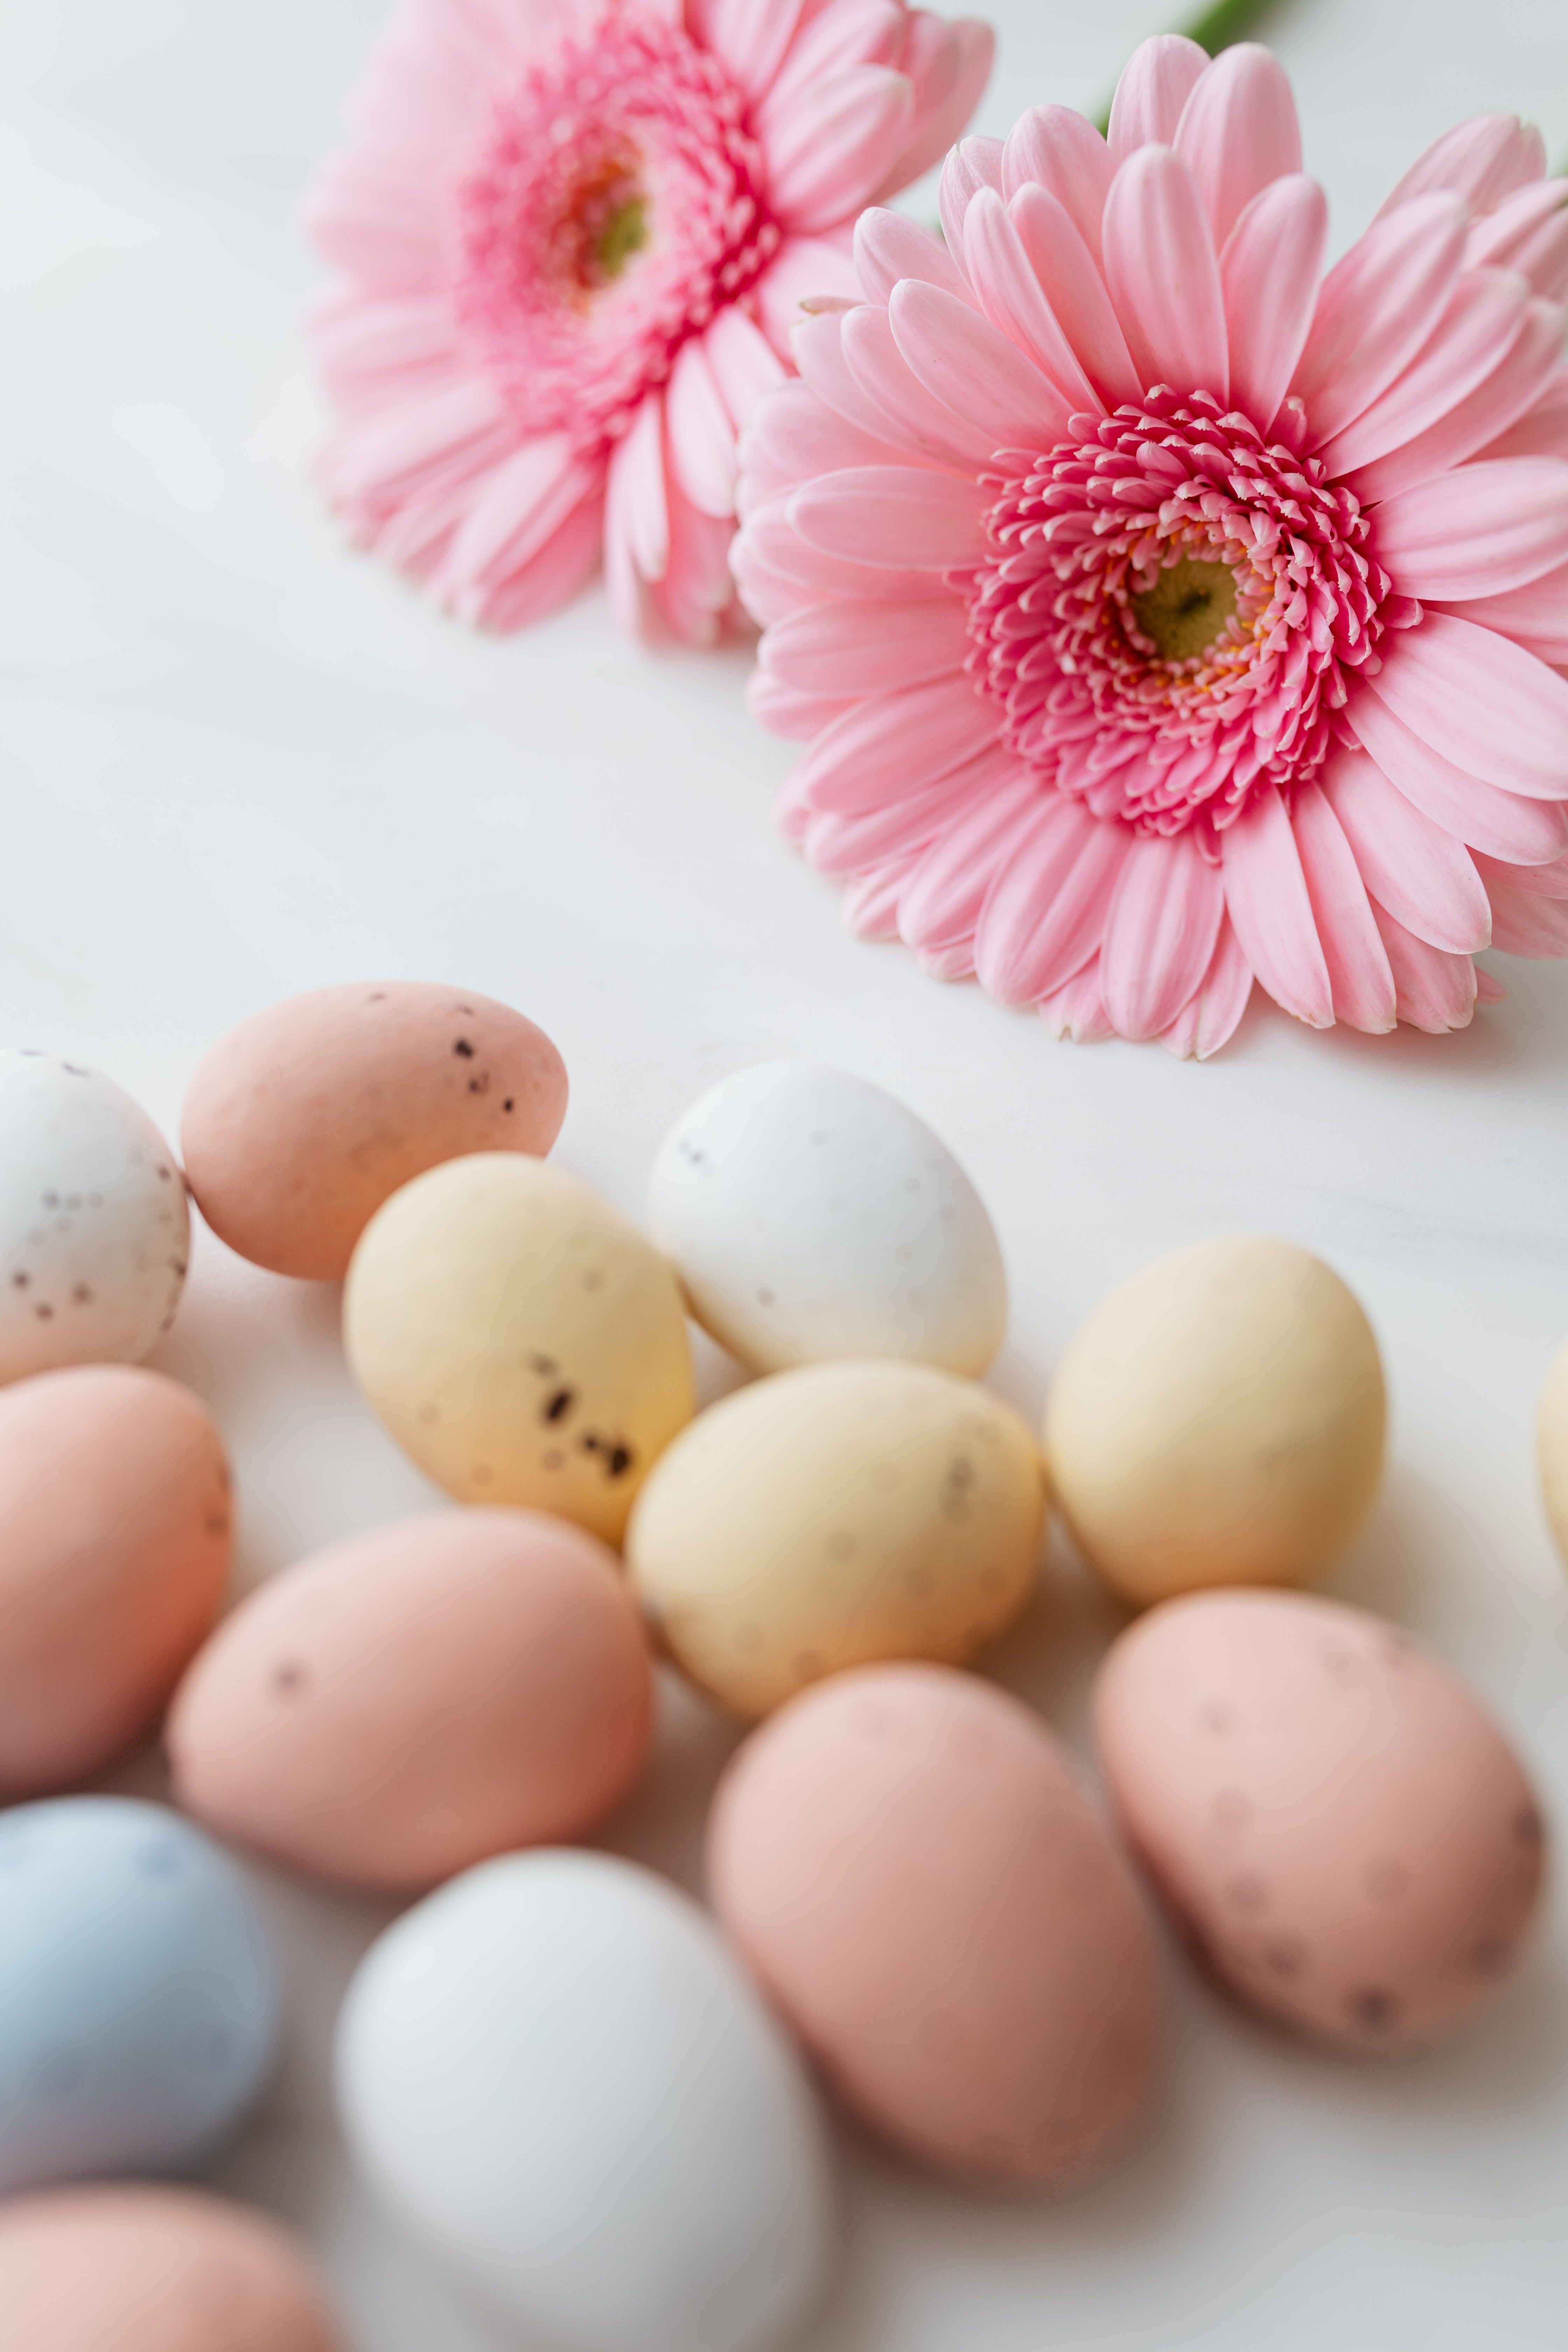 A table with eggs and pink flowers on it - Easter